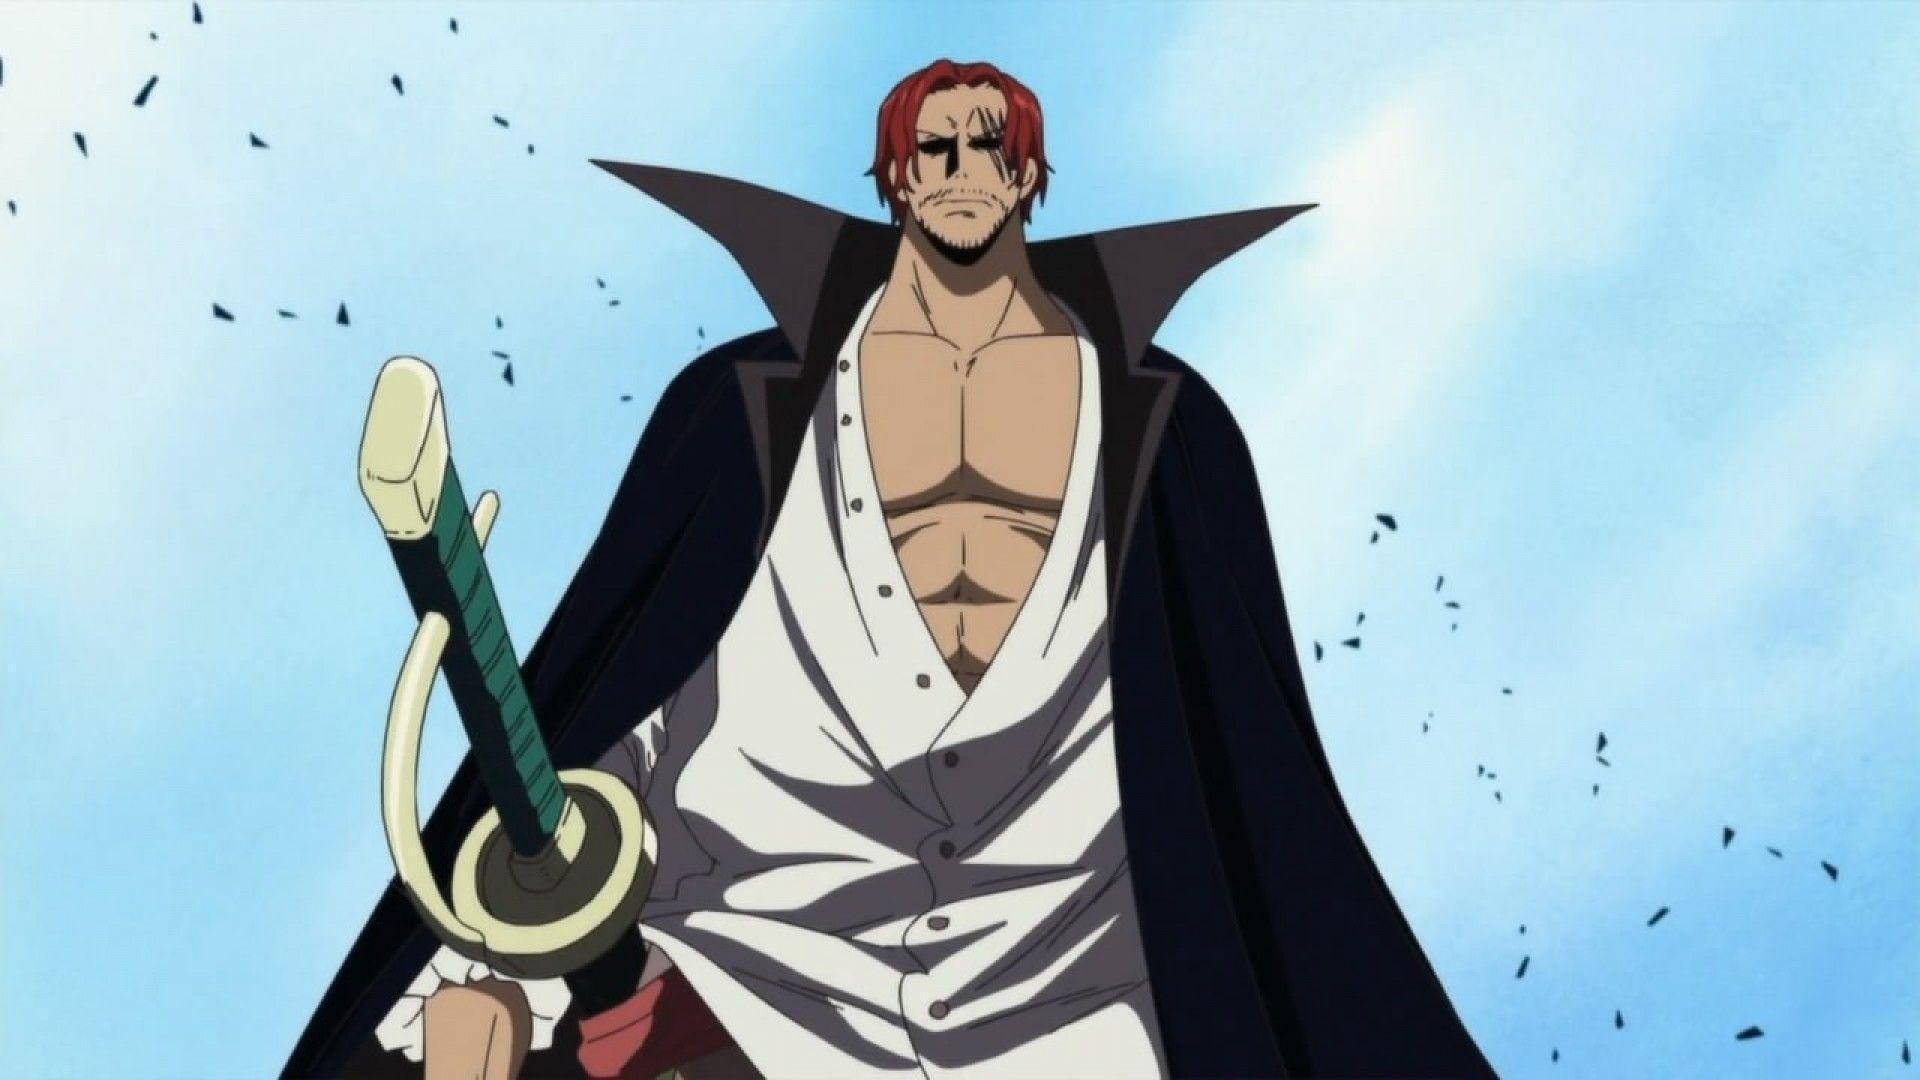 1920 x 1080 · jpeg - One Piece Shanks Wallpapers - Wallpaper Cave